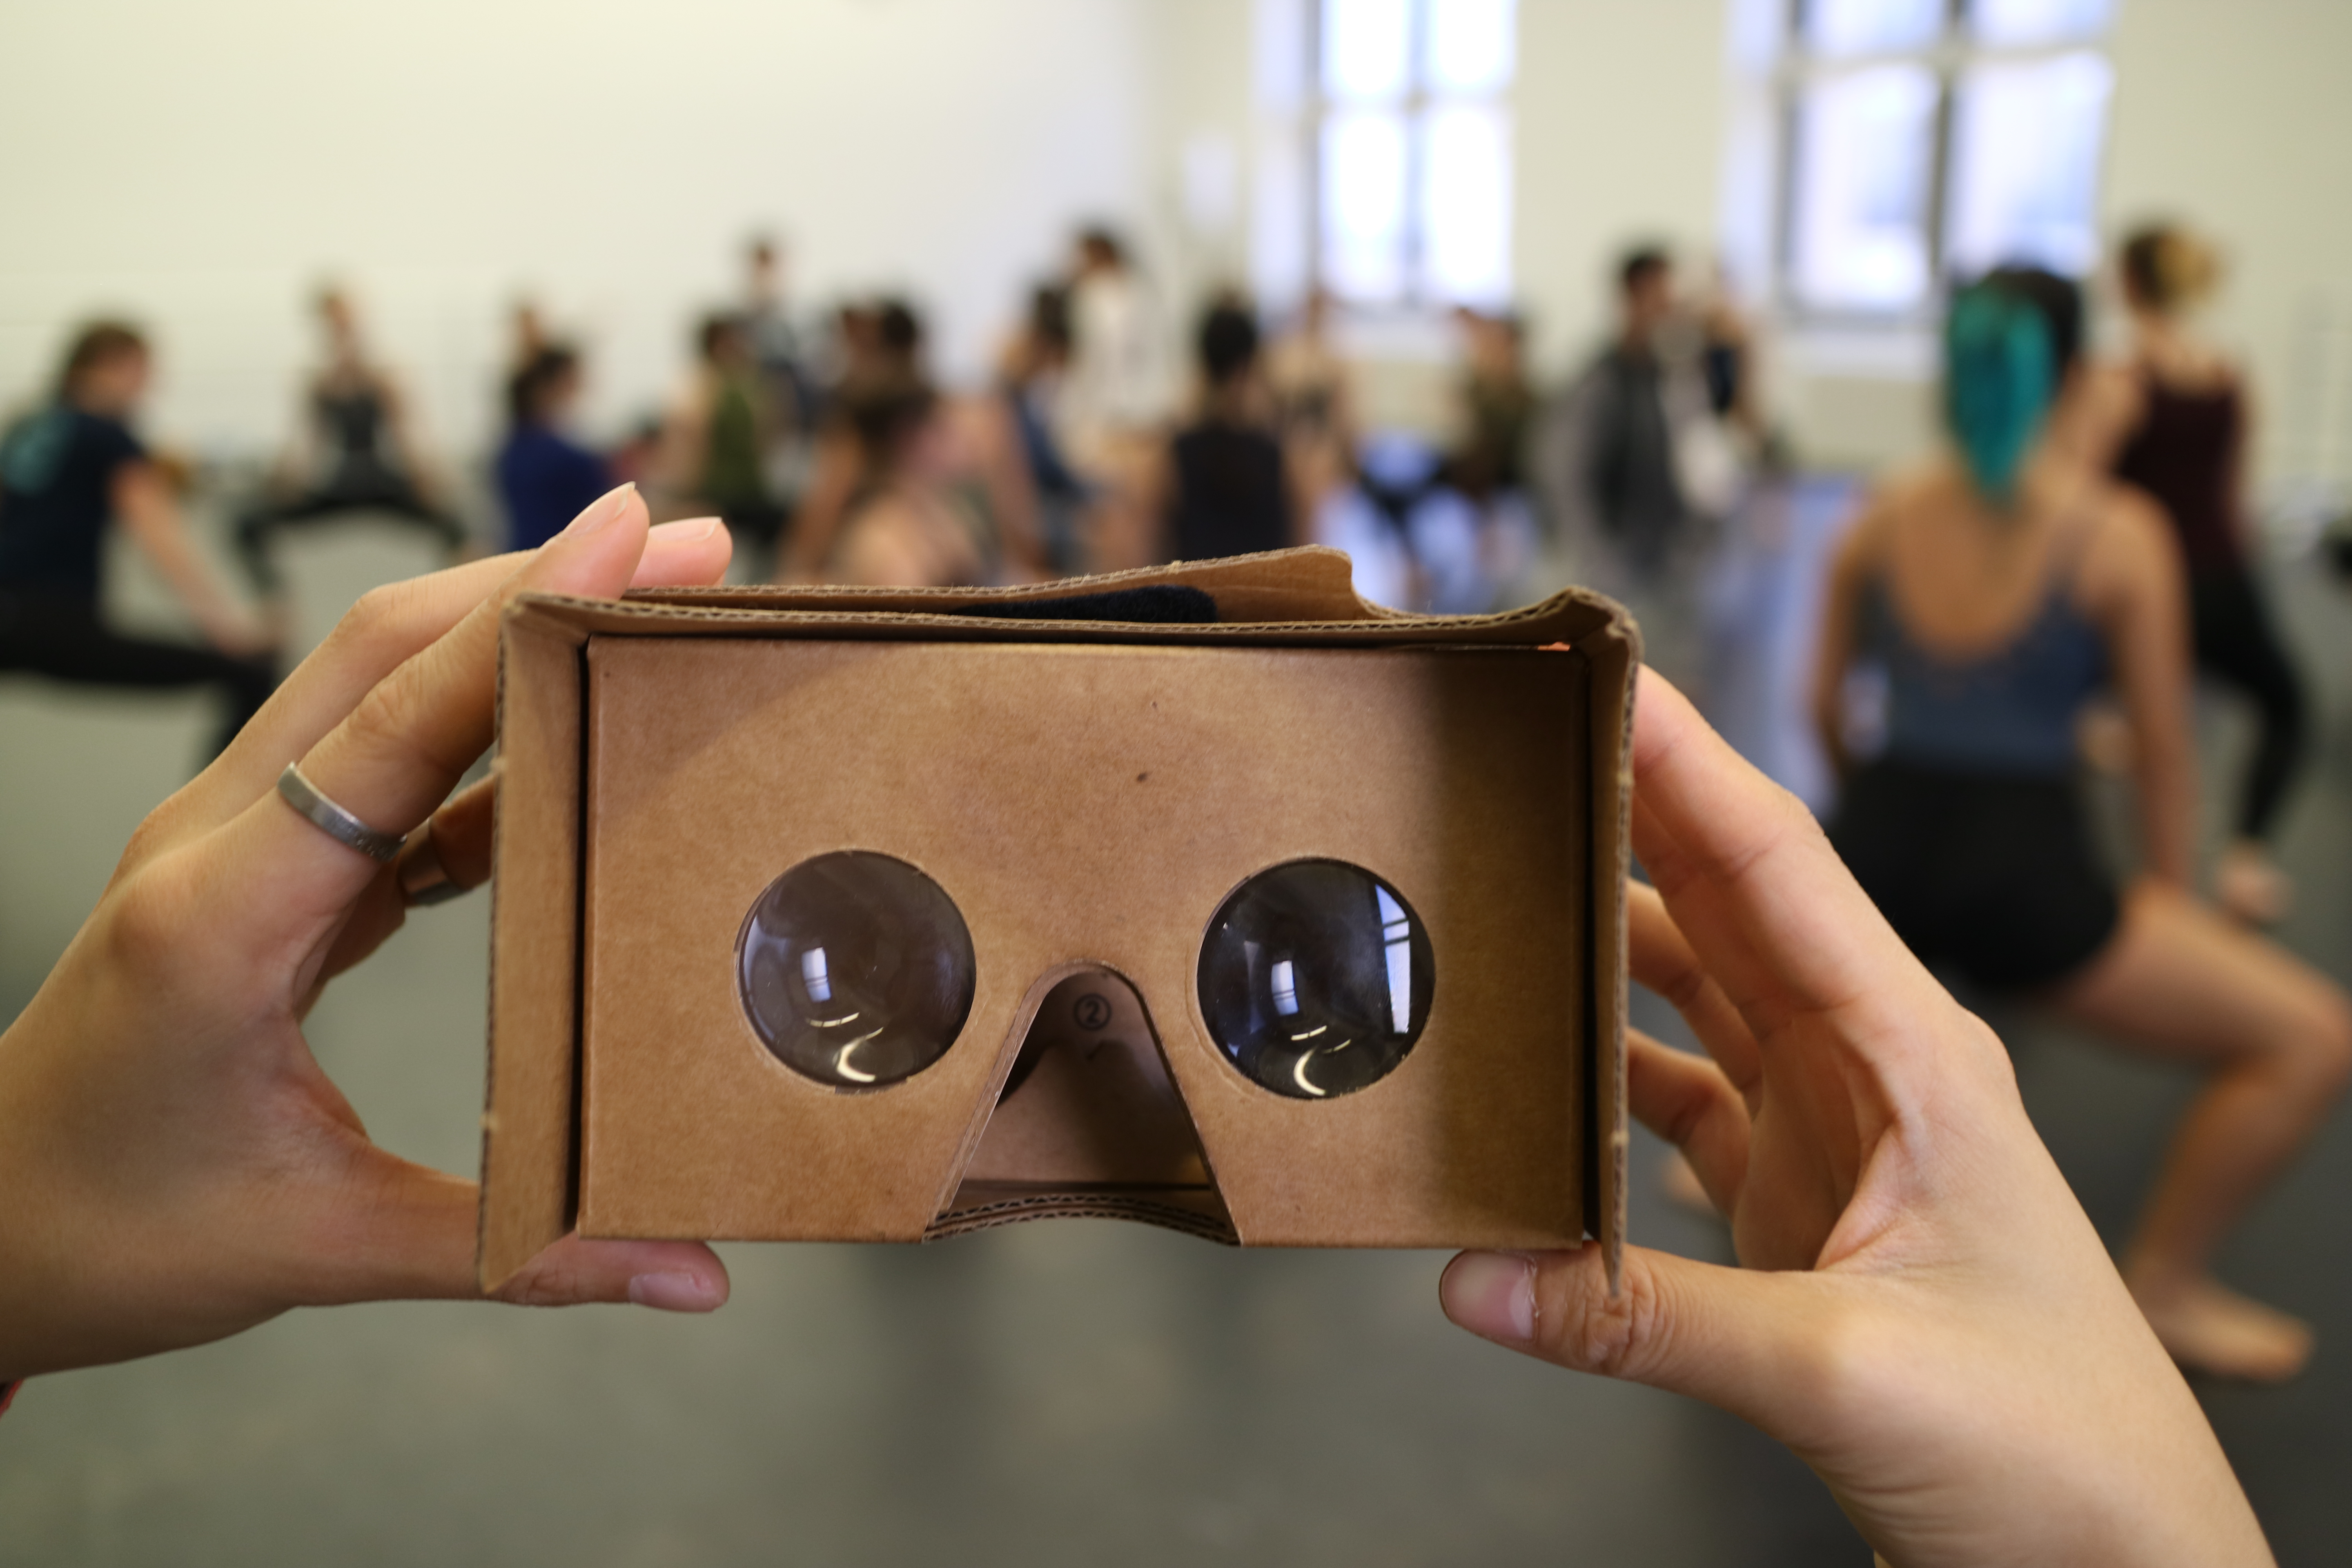 360 cardboard viewer is held in the foreground of dancers. 